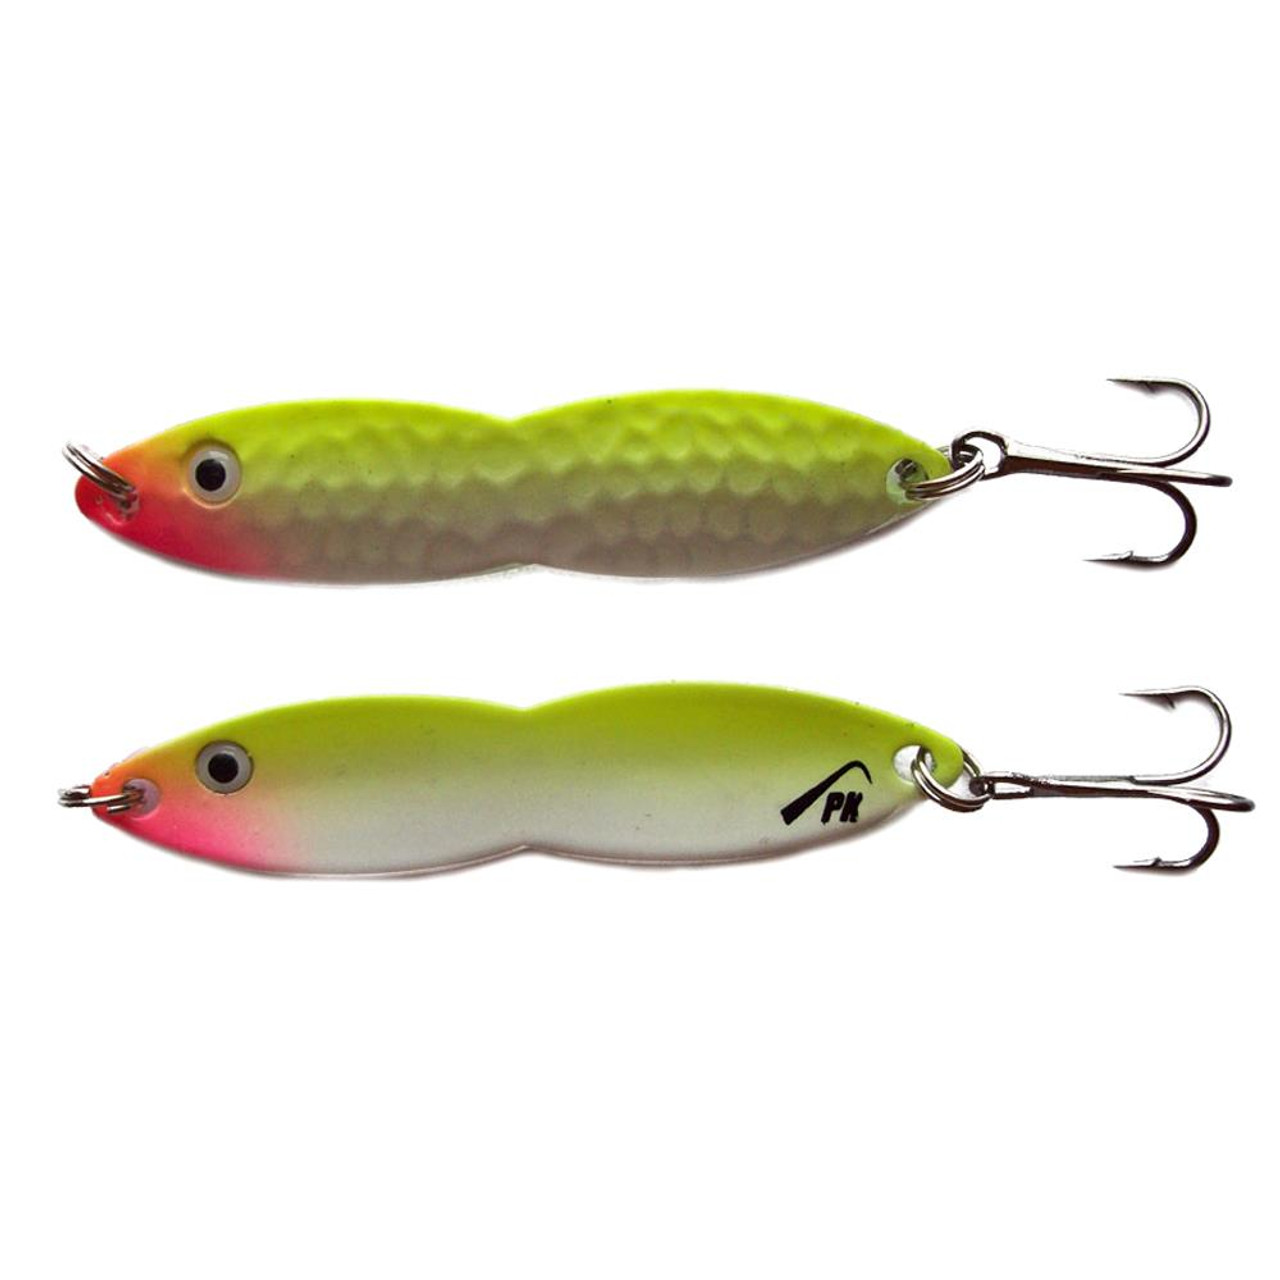 2 WHOLESALE Musky Pike Spoon 9 inch  Chart /green  Squid fishing lure lot  #07